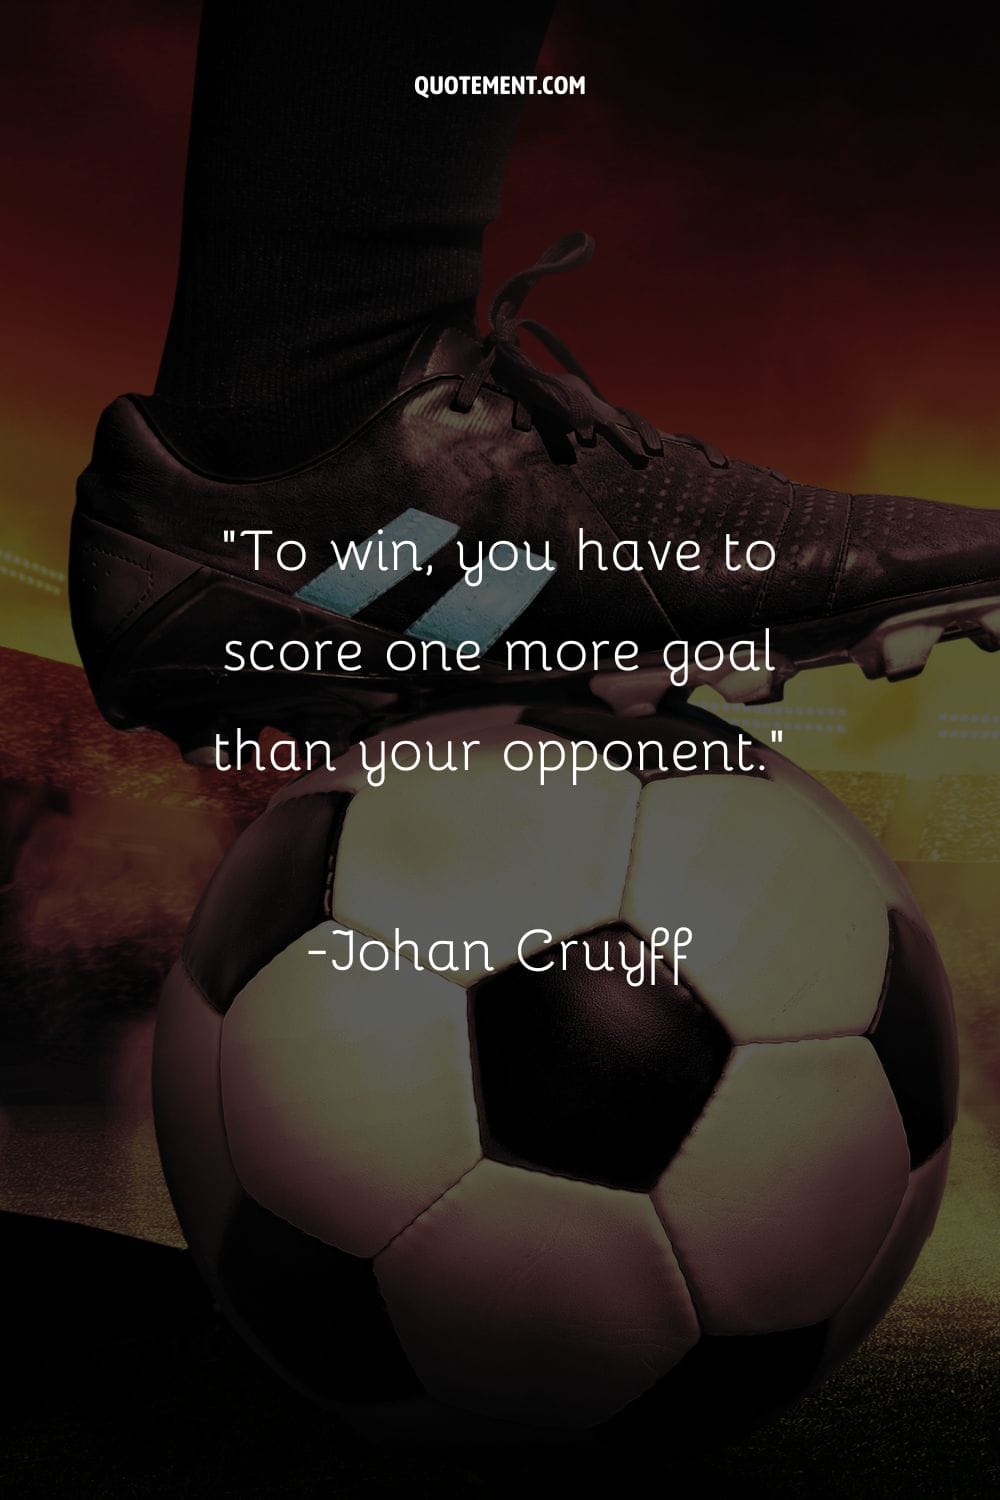 Soccer star in black cleats, foot on the ball representing quote for soccer team